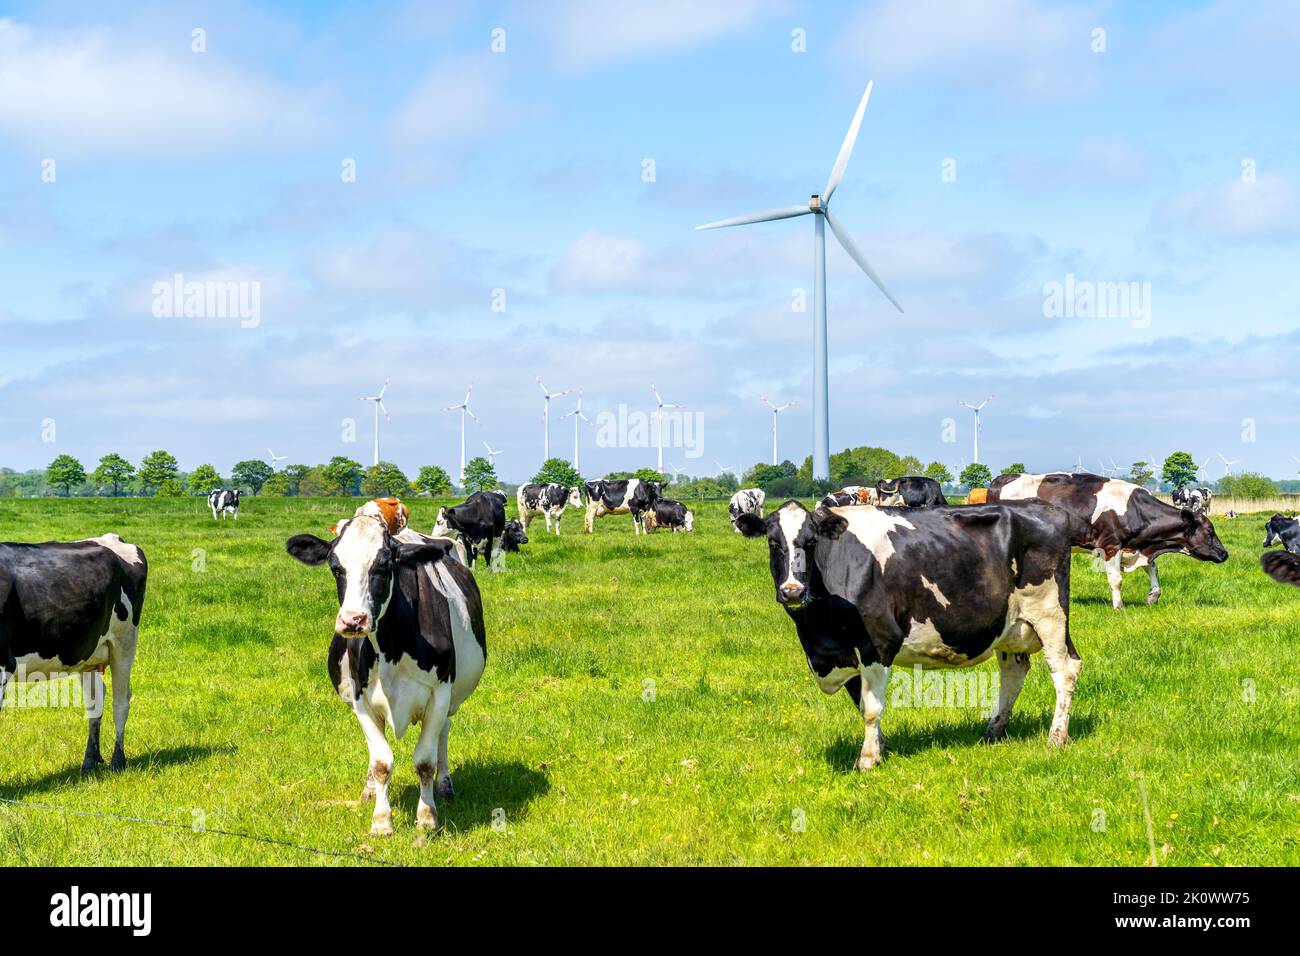 Herd of Cows on a meadow in front of windmills who produce renewable energy Stock Photo